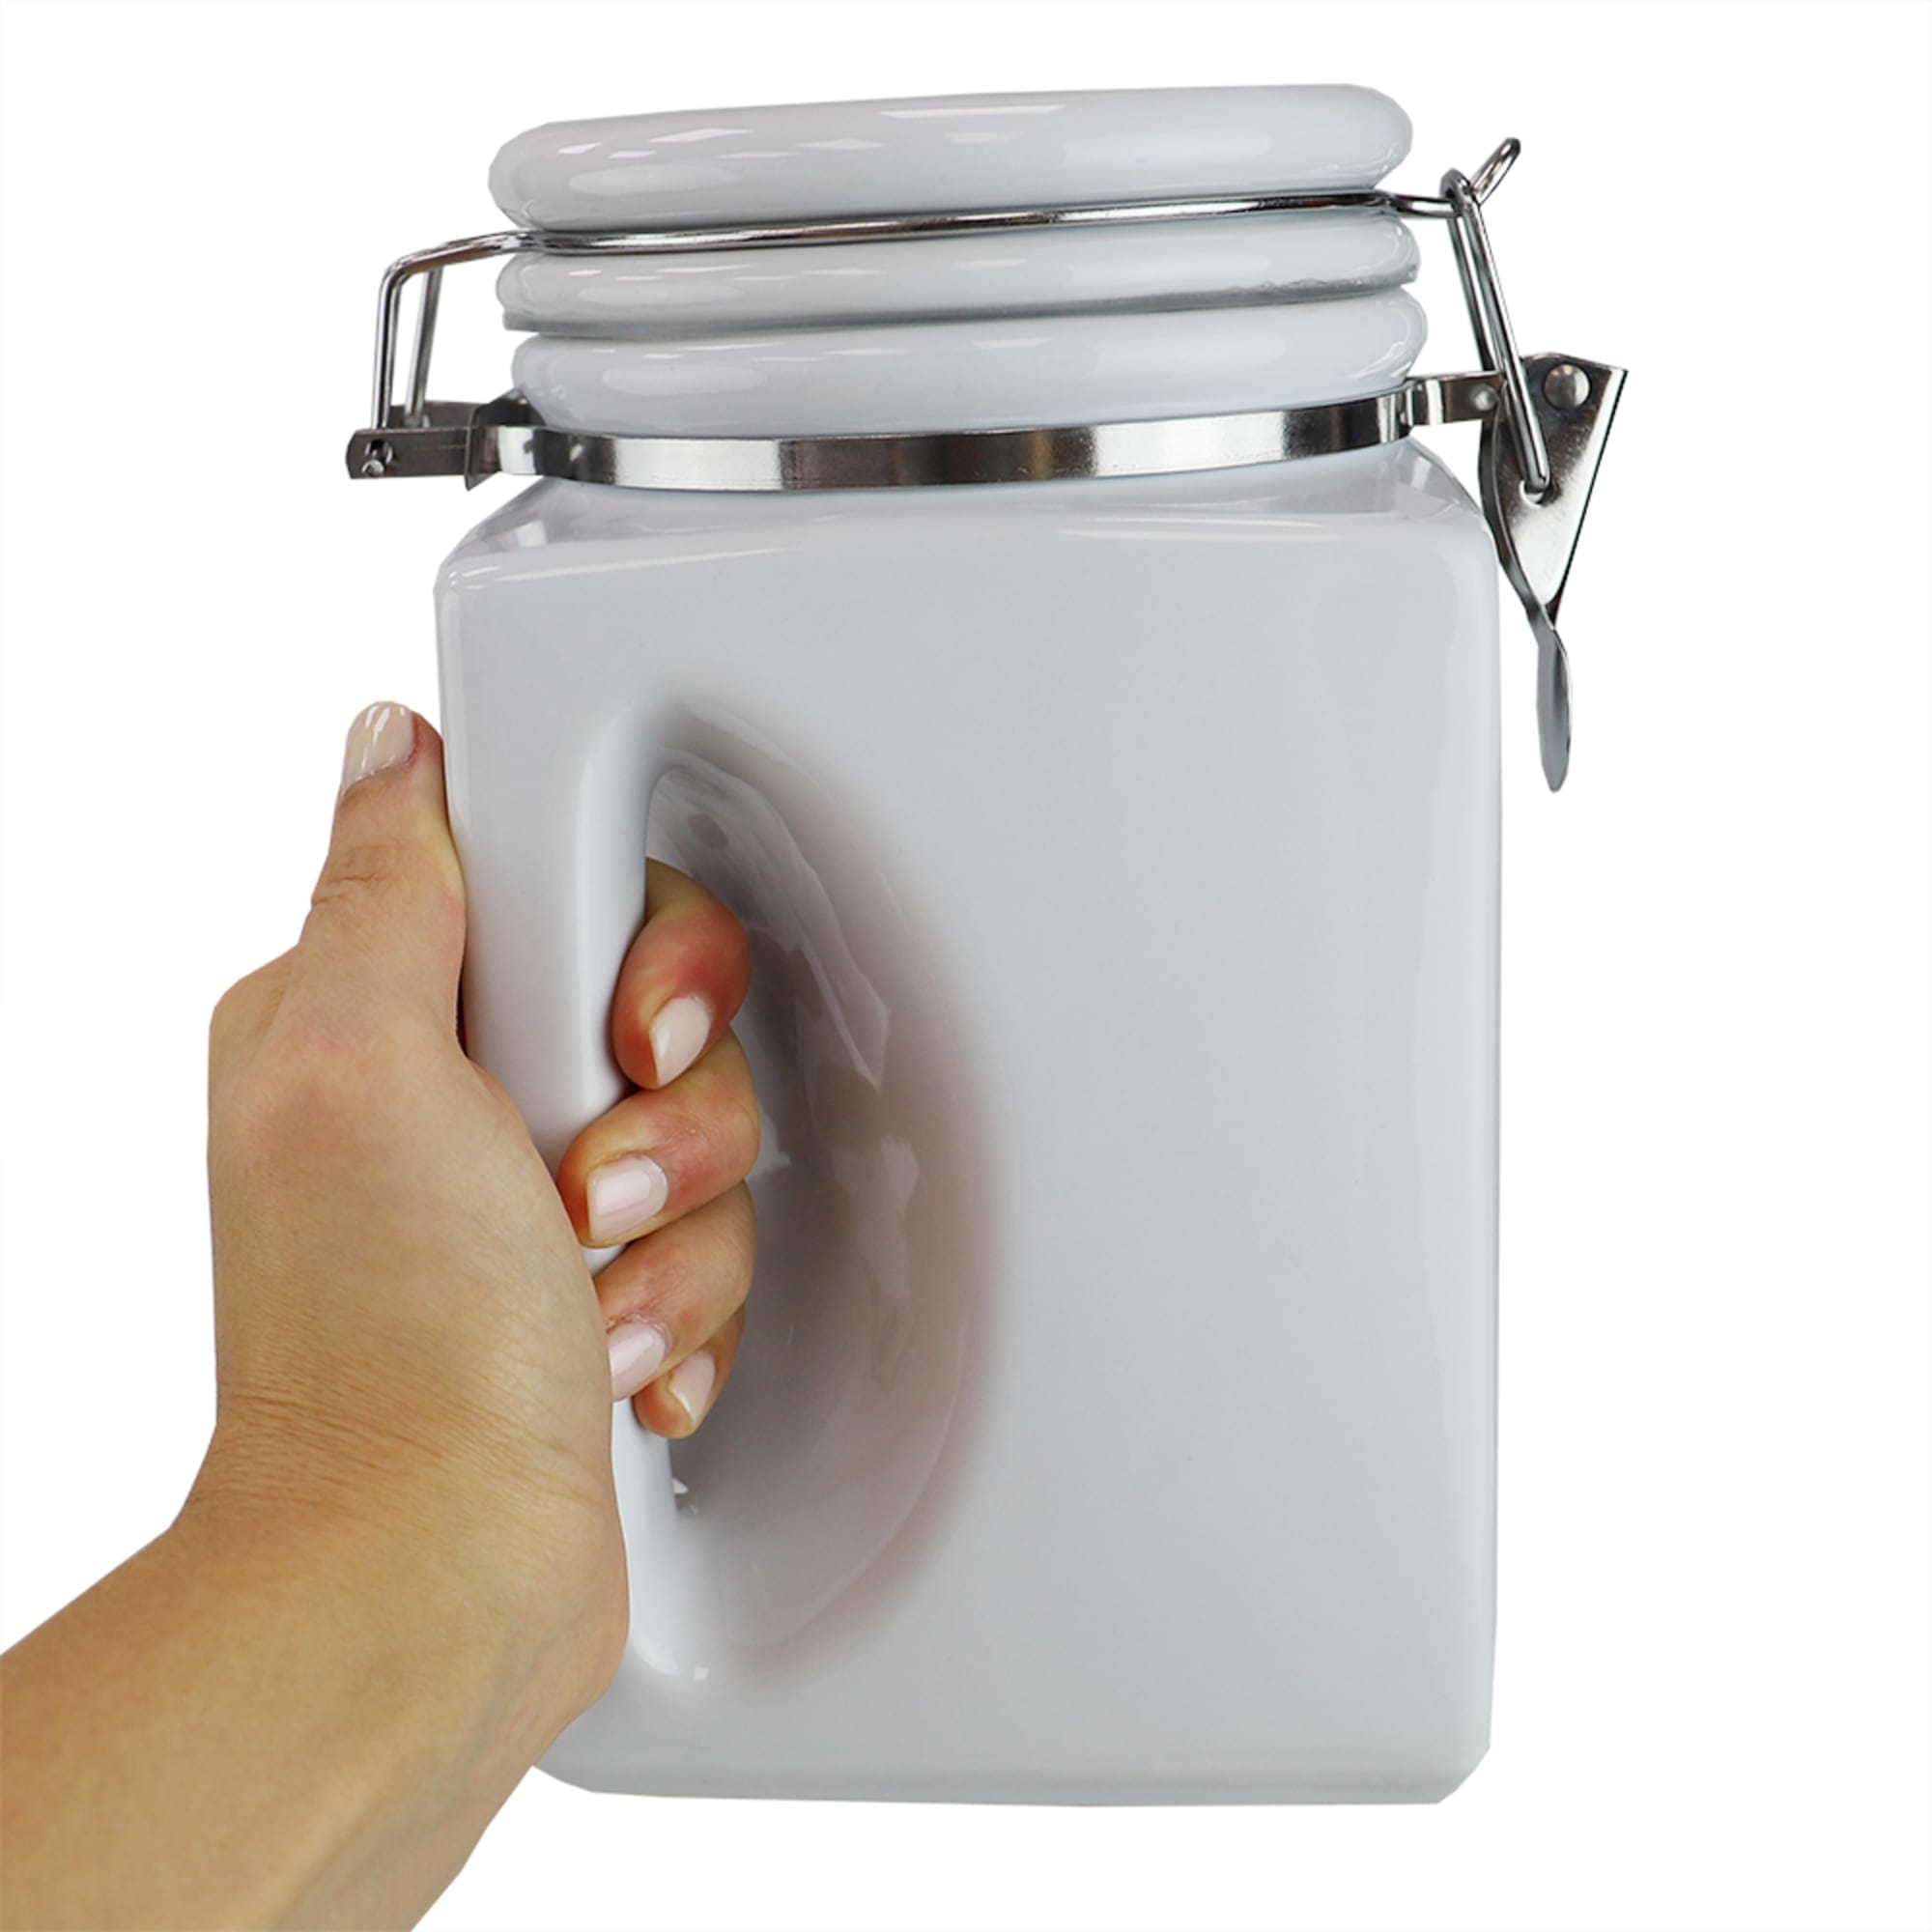 Home Basics Easy Grip 4 Piece Ceramic Canisters with Spoons, White $30.00 EACH, CASE PACK OF 2